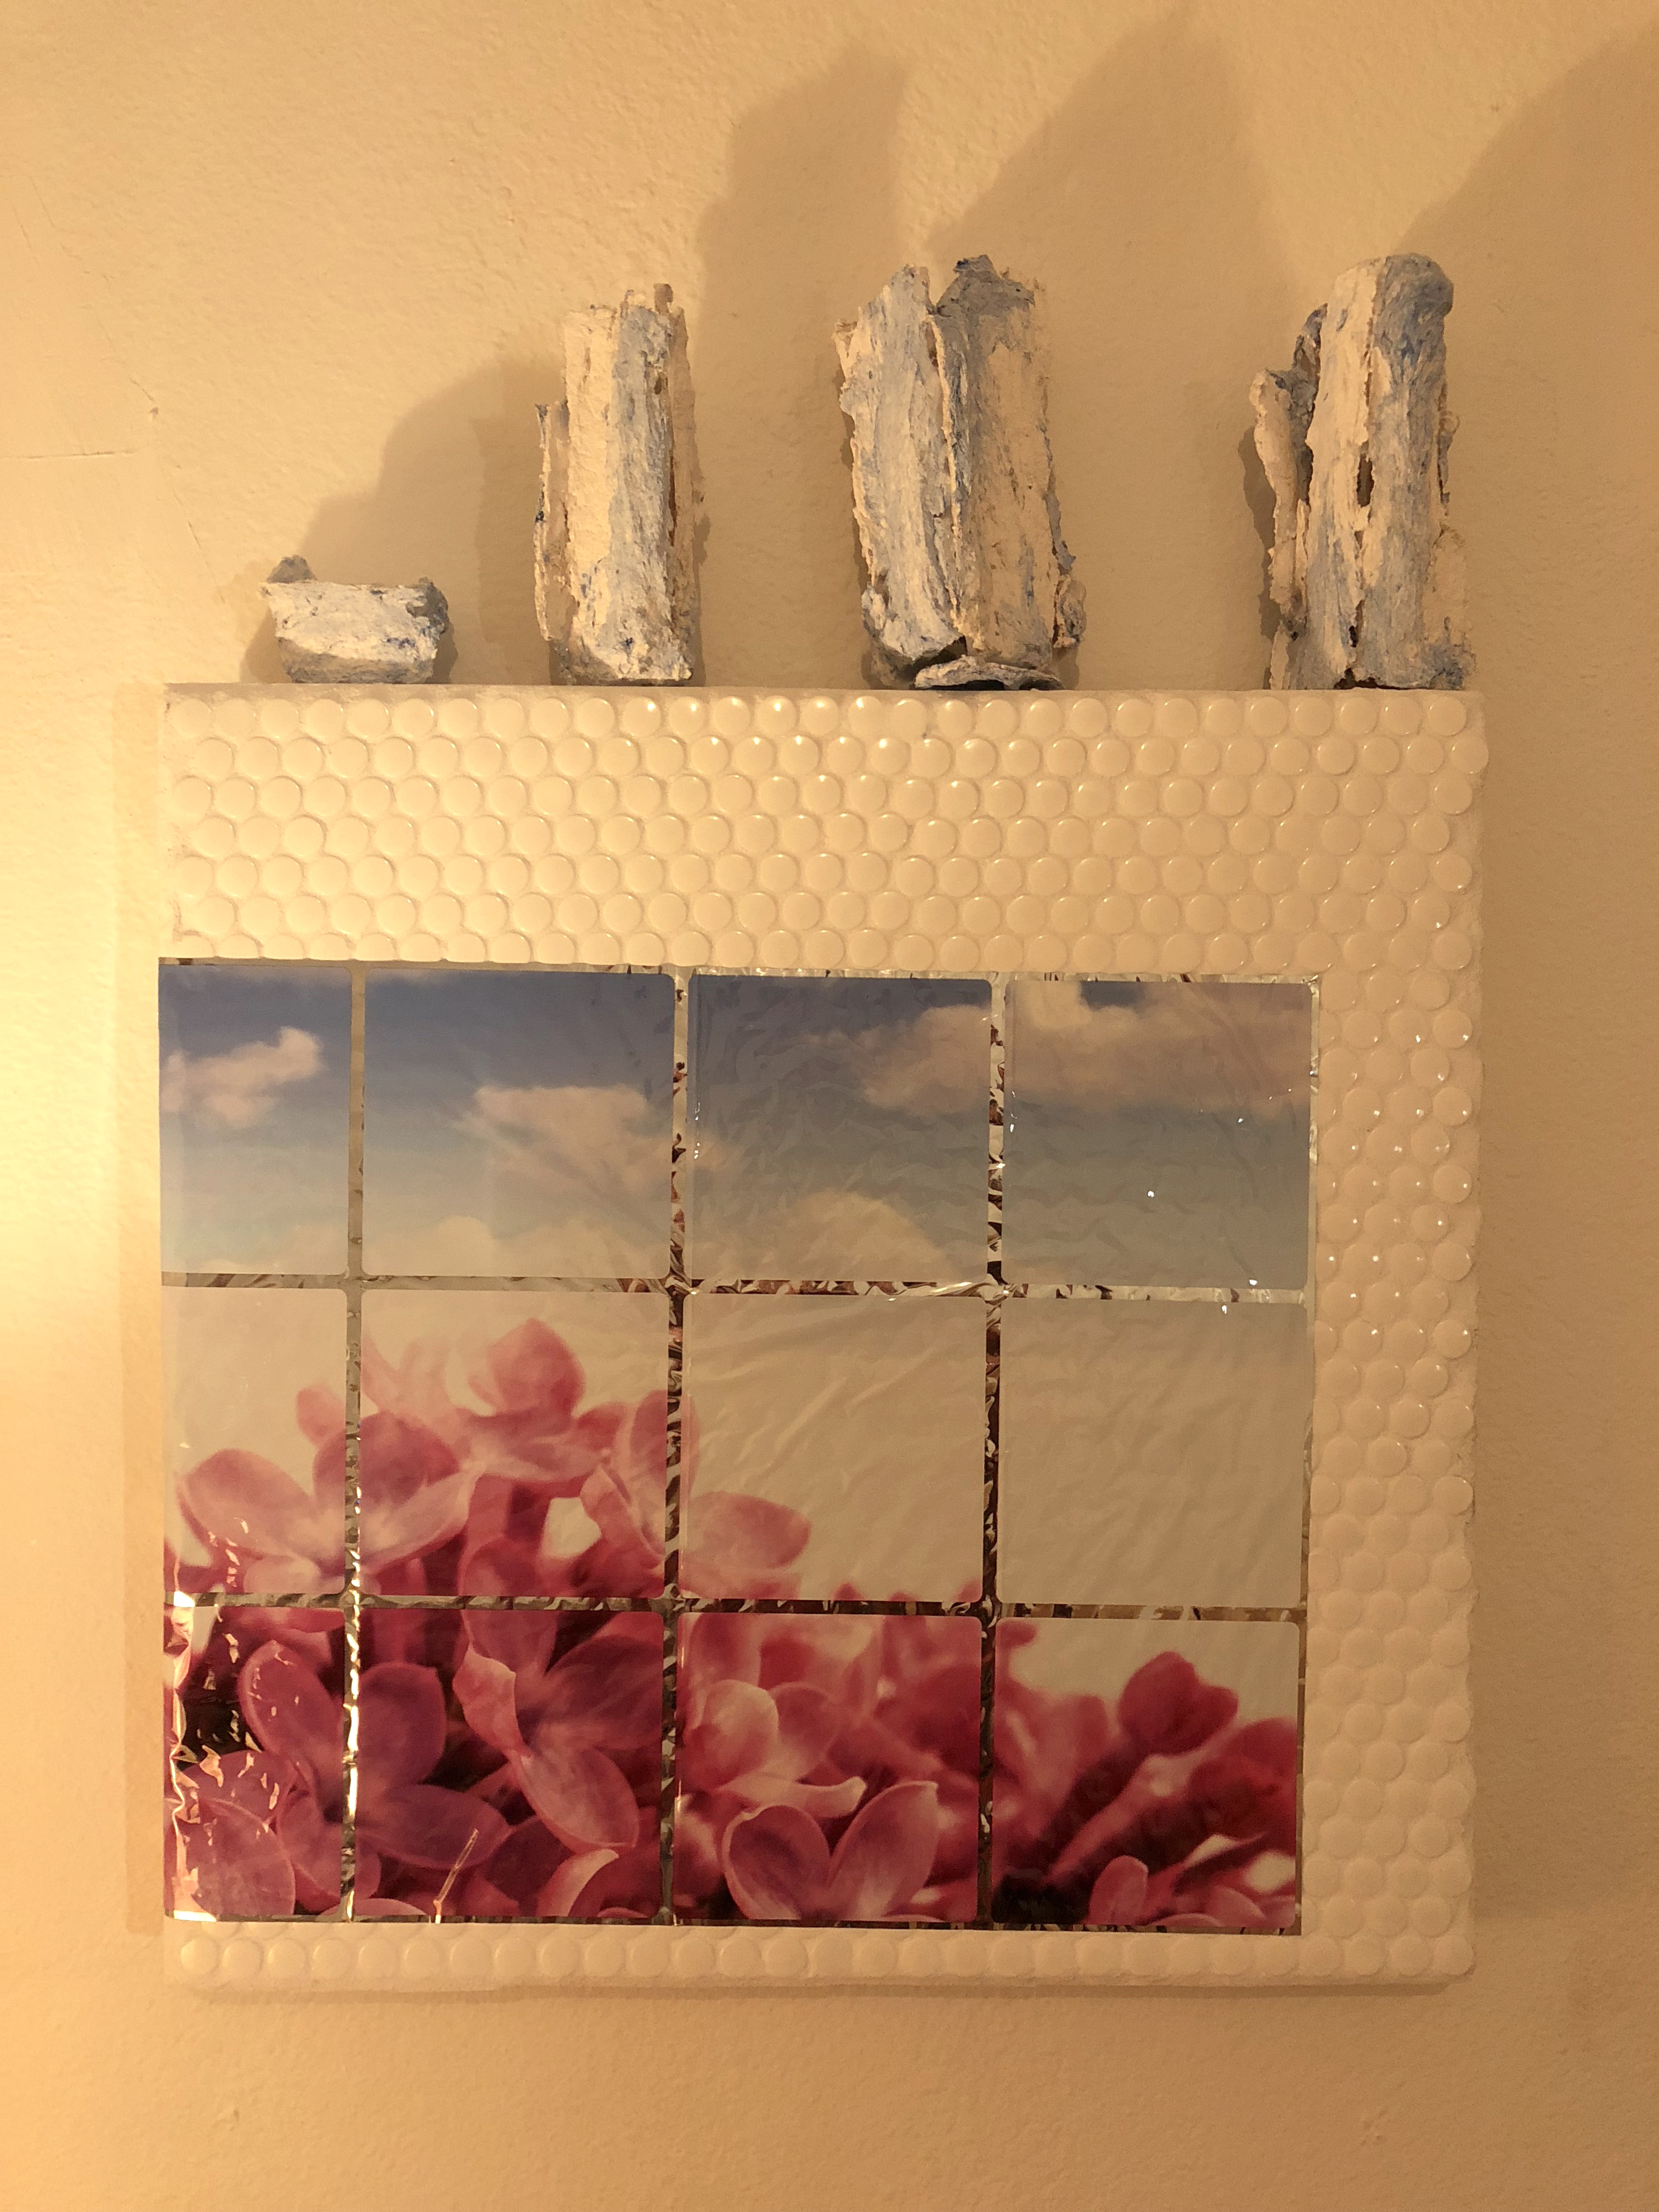 Tiled wall sculpture with a photographic print of flowers on it hung on a white wall